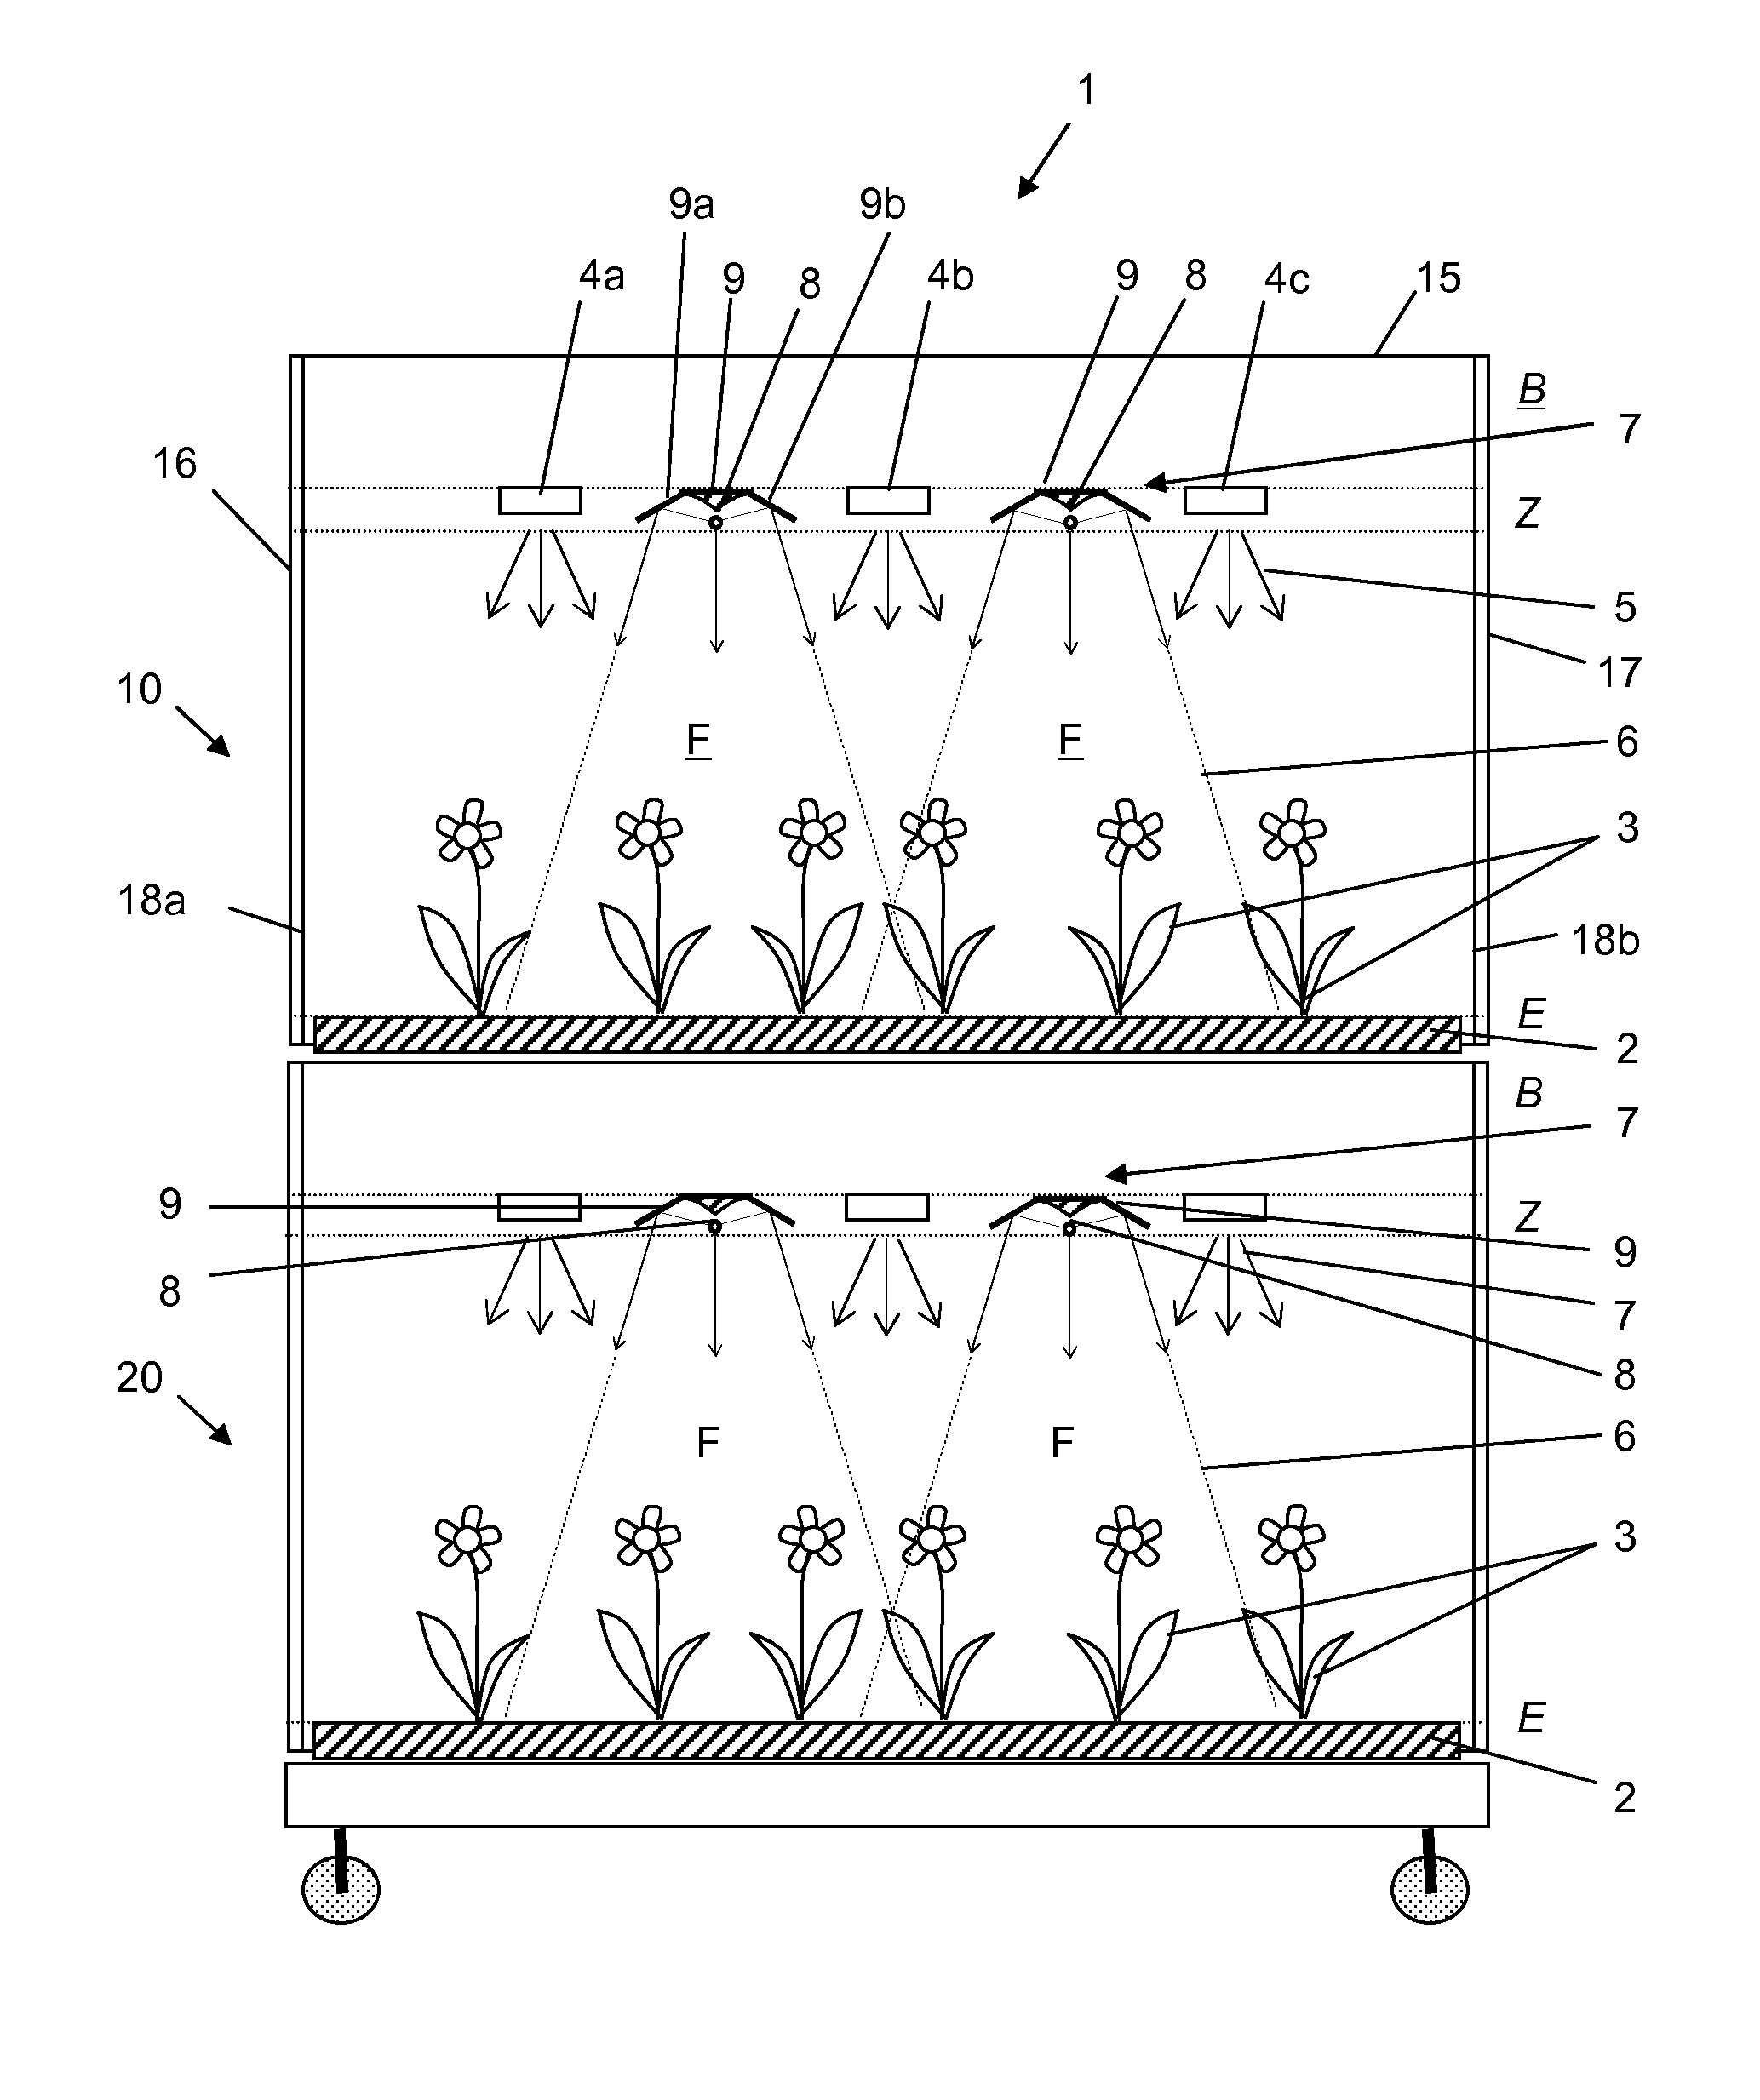 Irradiation device for irradiating plants